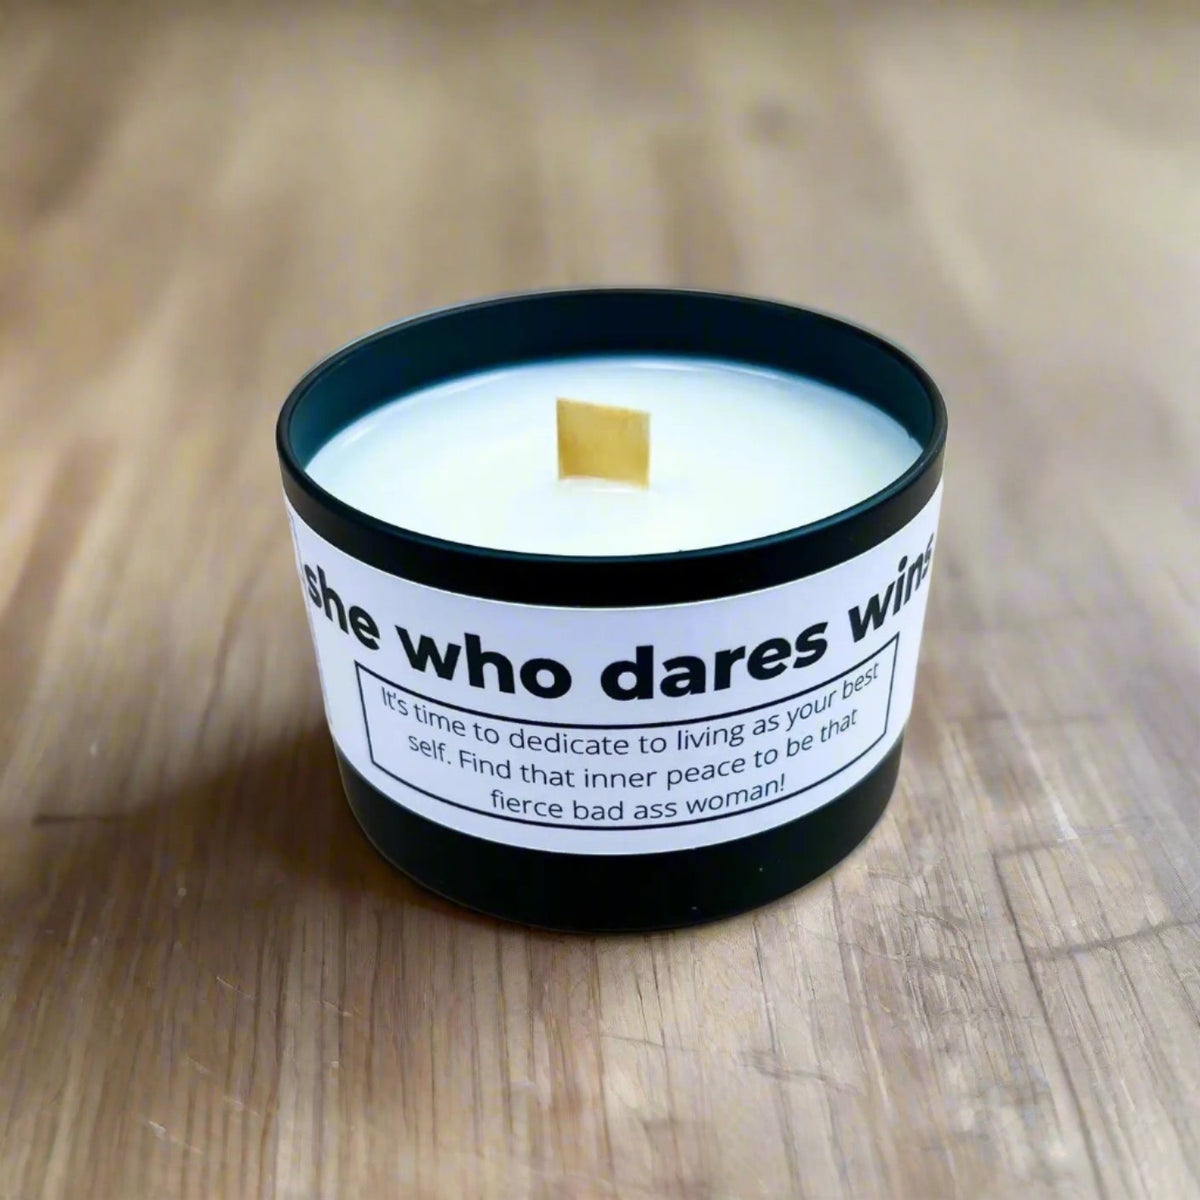 She Who Dares Candle